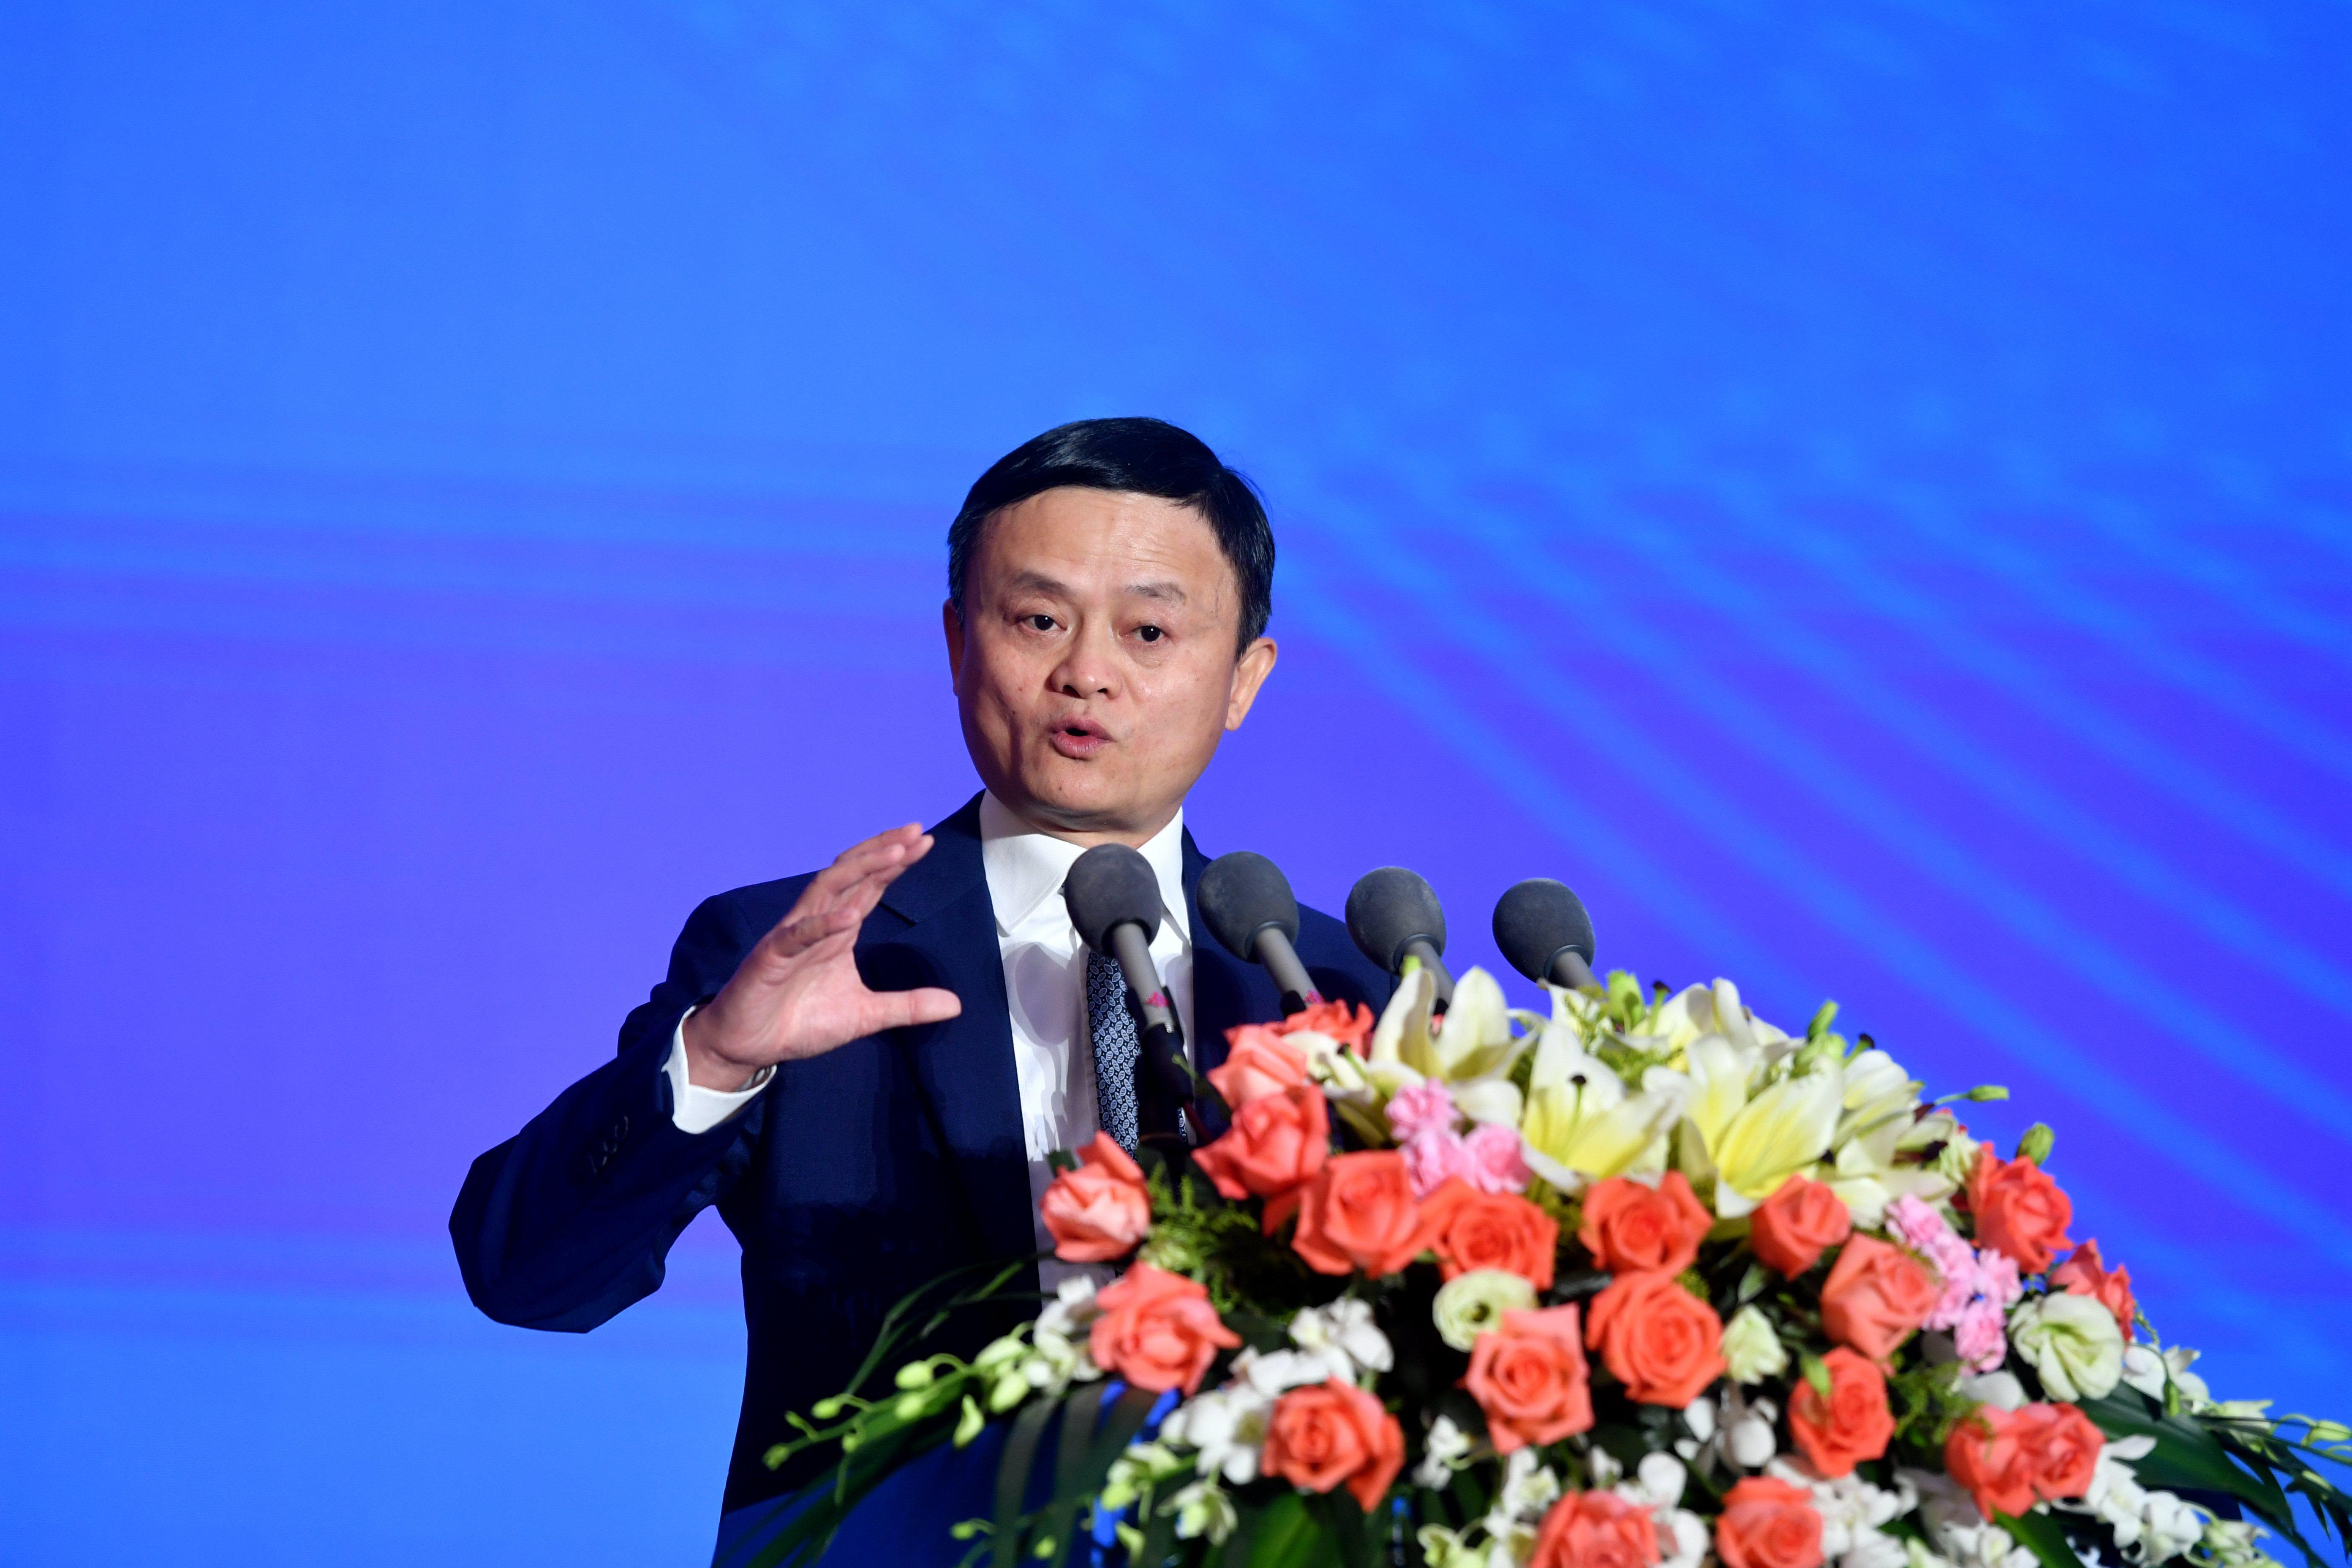 Alibaba founder Jack Ma reappears after repressing his technological empire